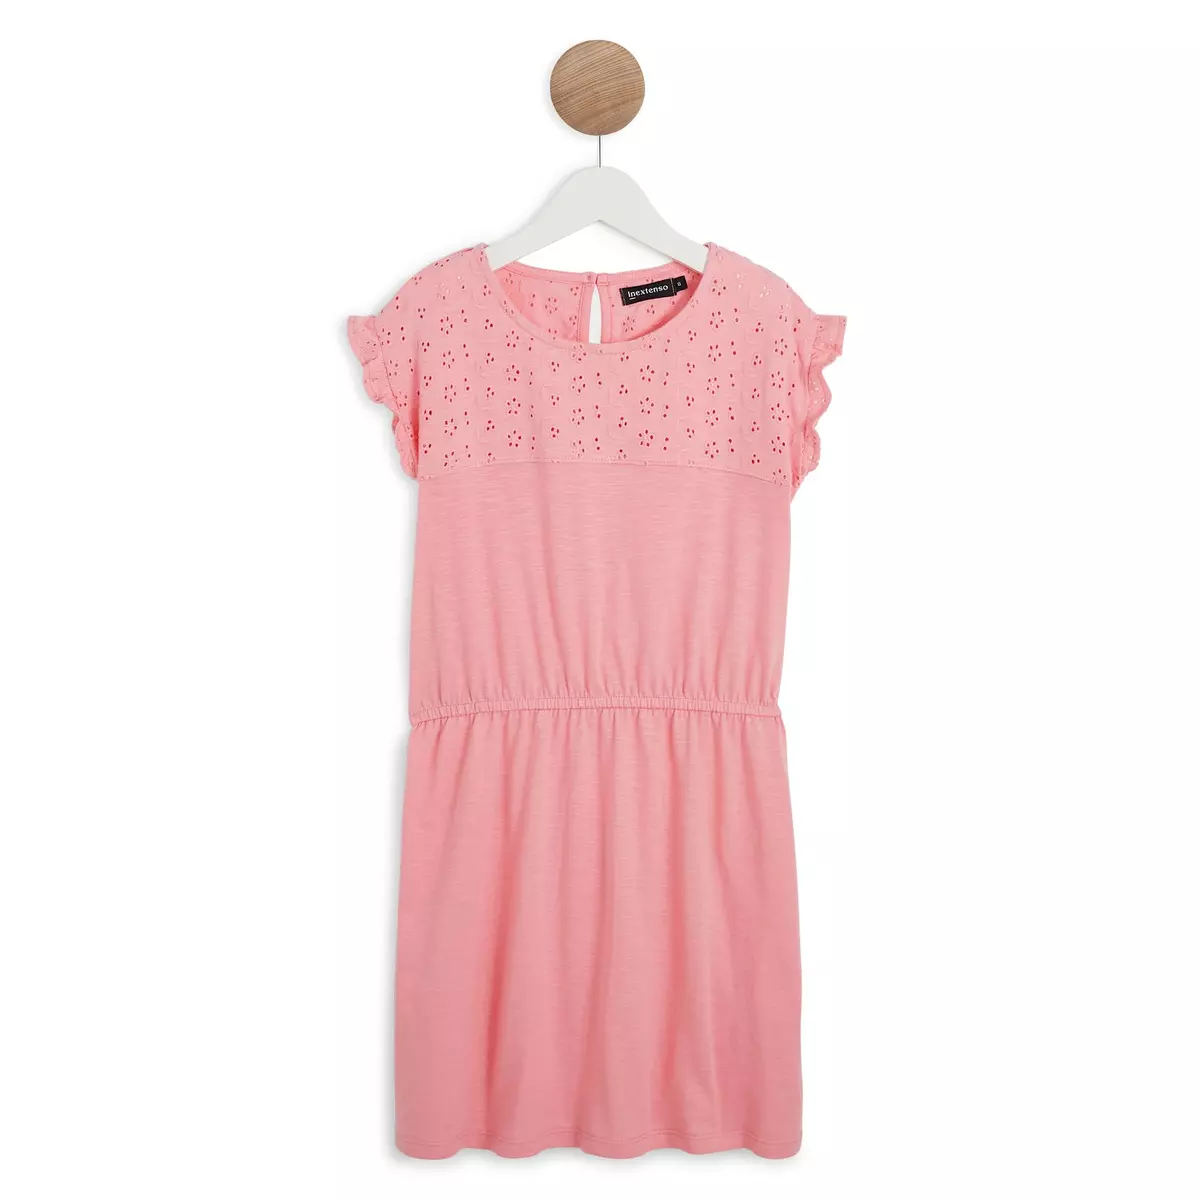 INEXTENSO Robe longue rose corail fille